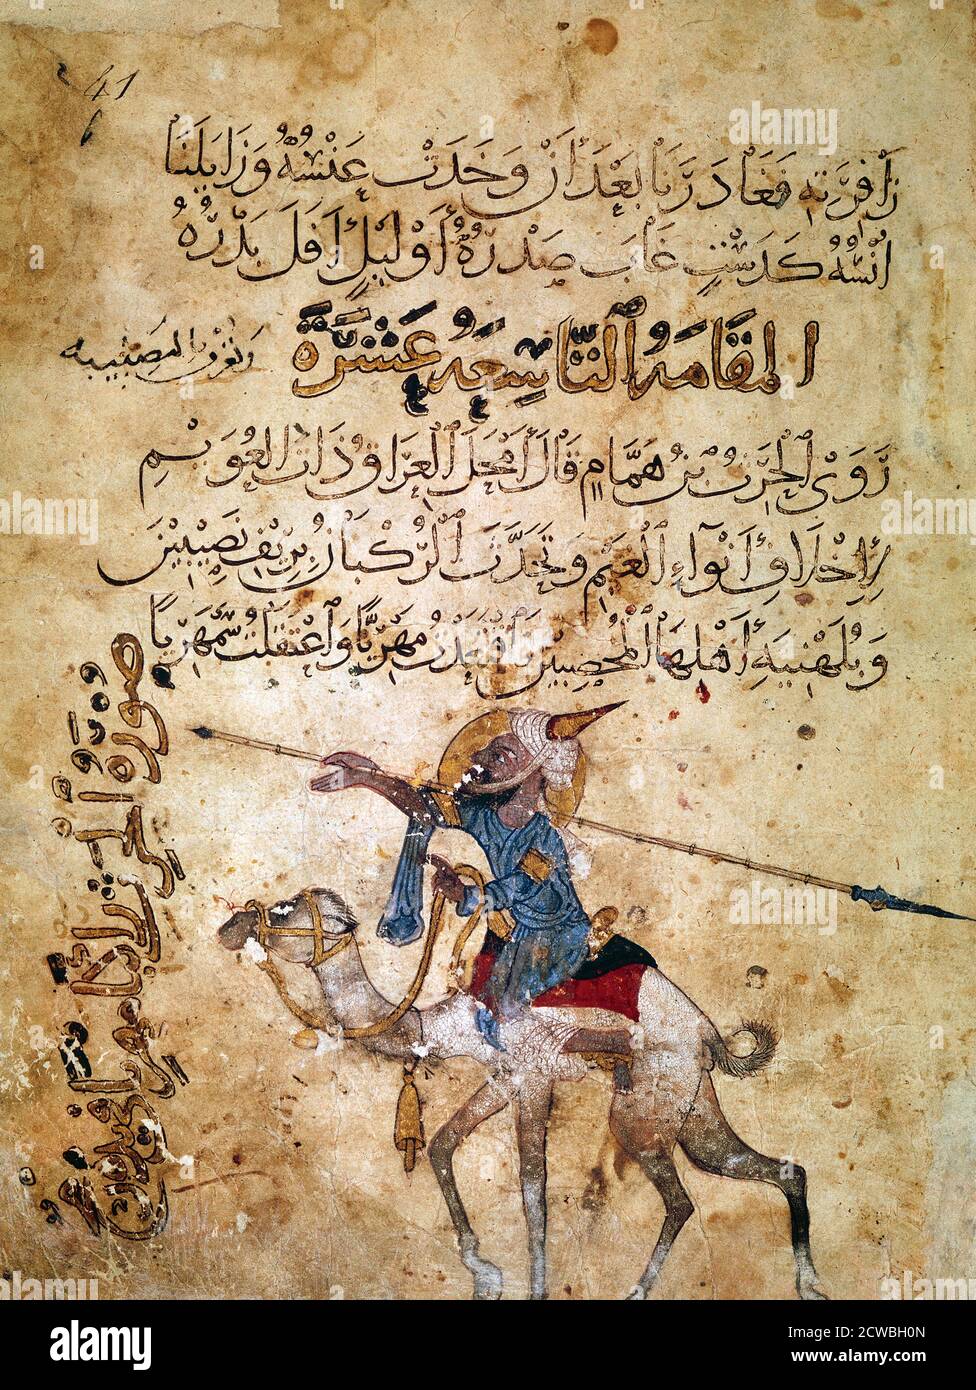 Muslim warrior mounted on a camel, 13th century. Arab manuscript from the Bibliotheque Nationale, Paris. Stock Photo